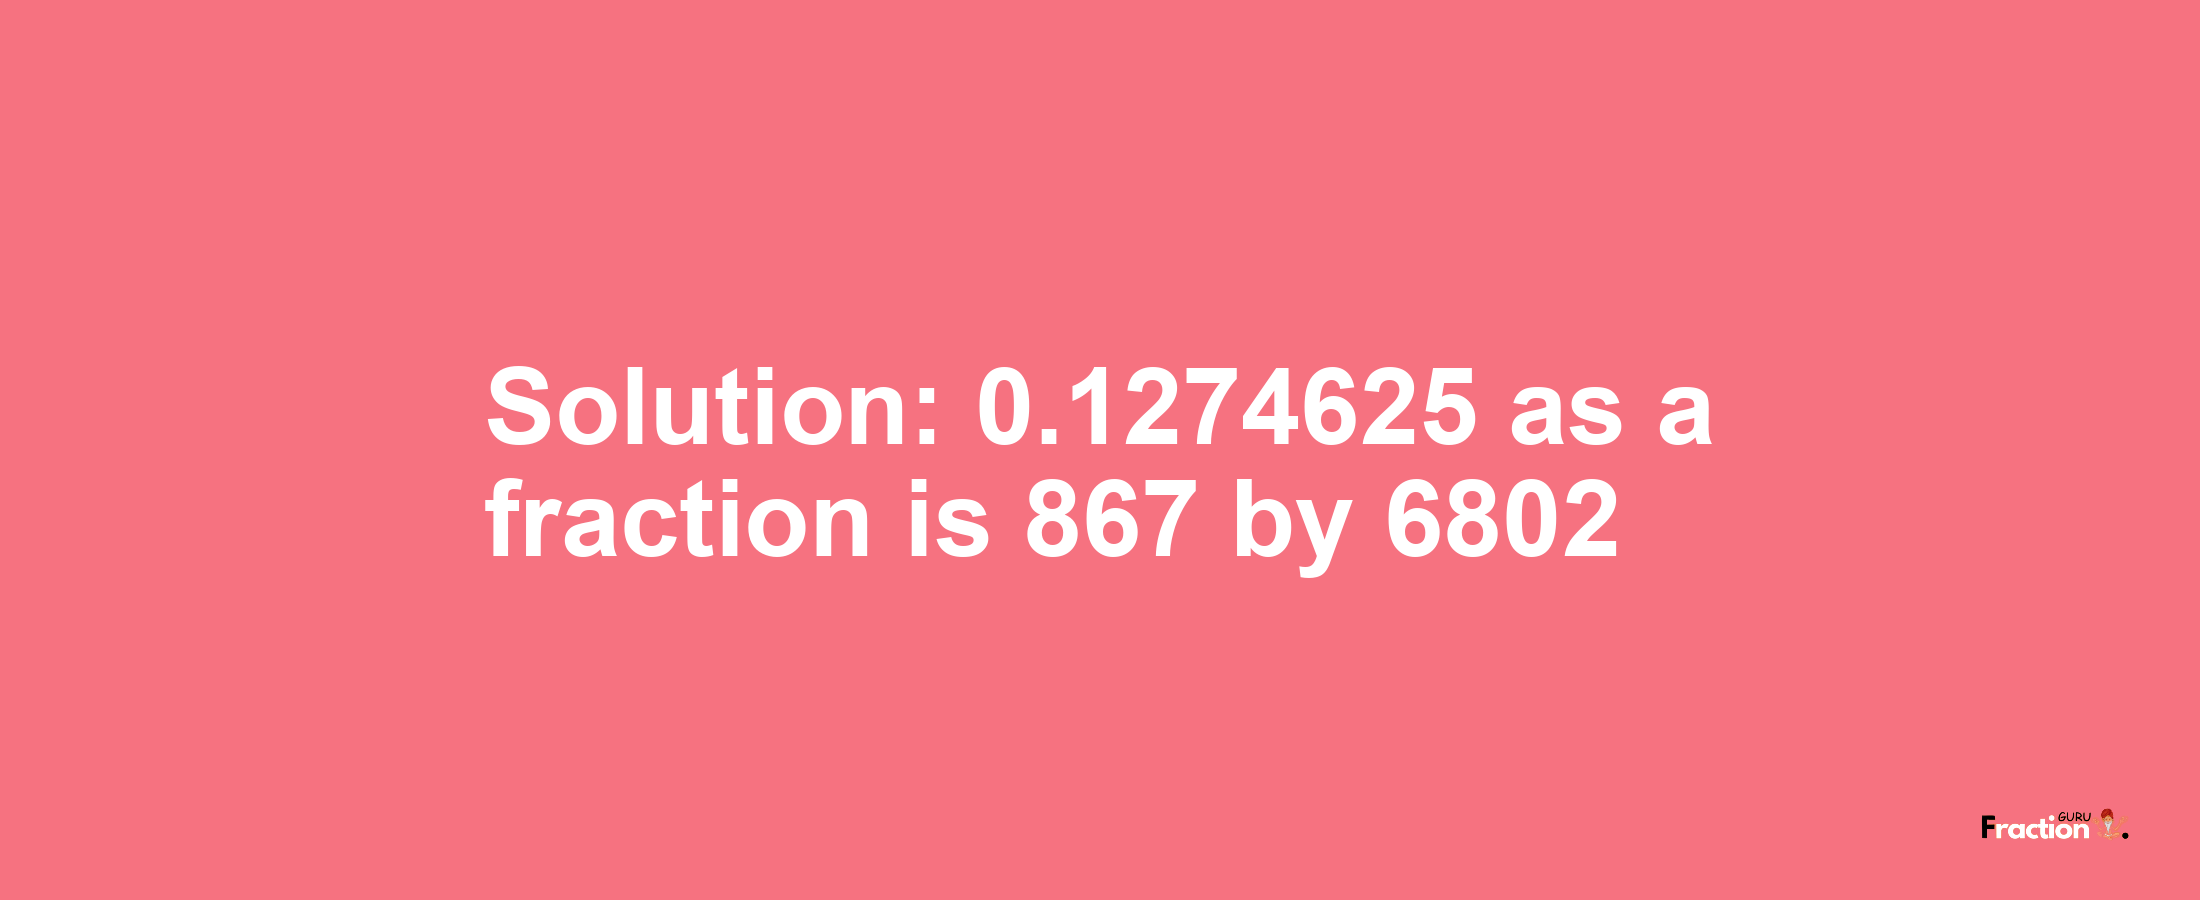 Solution:0.1274625 as a fraction is 867/6802